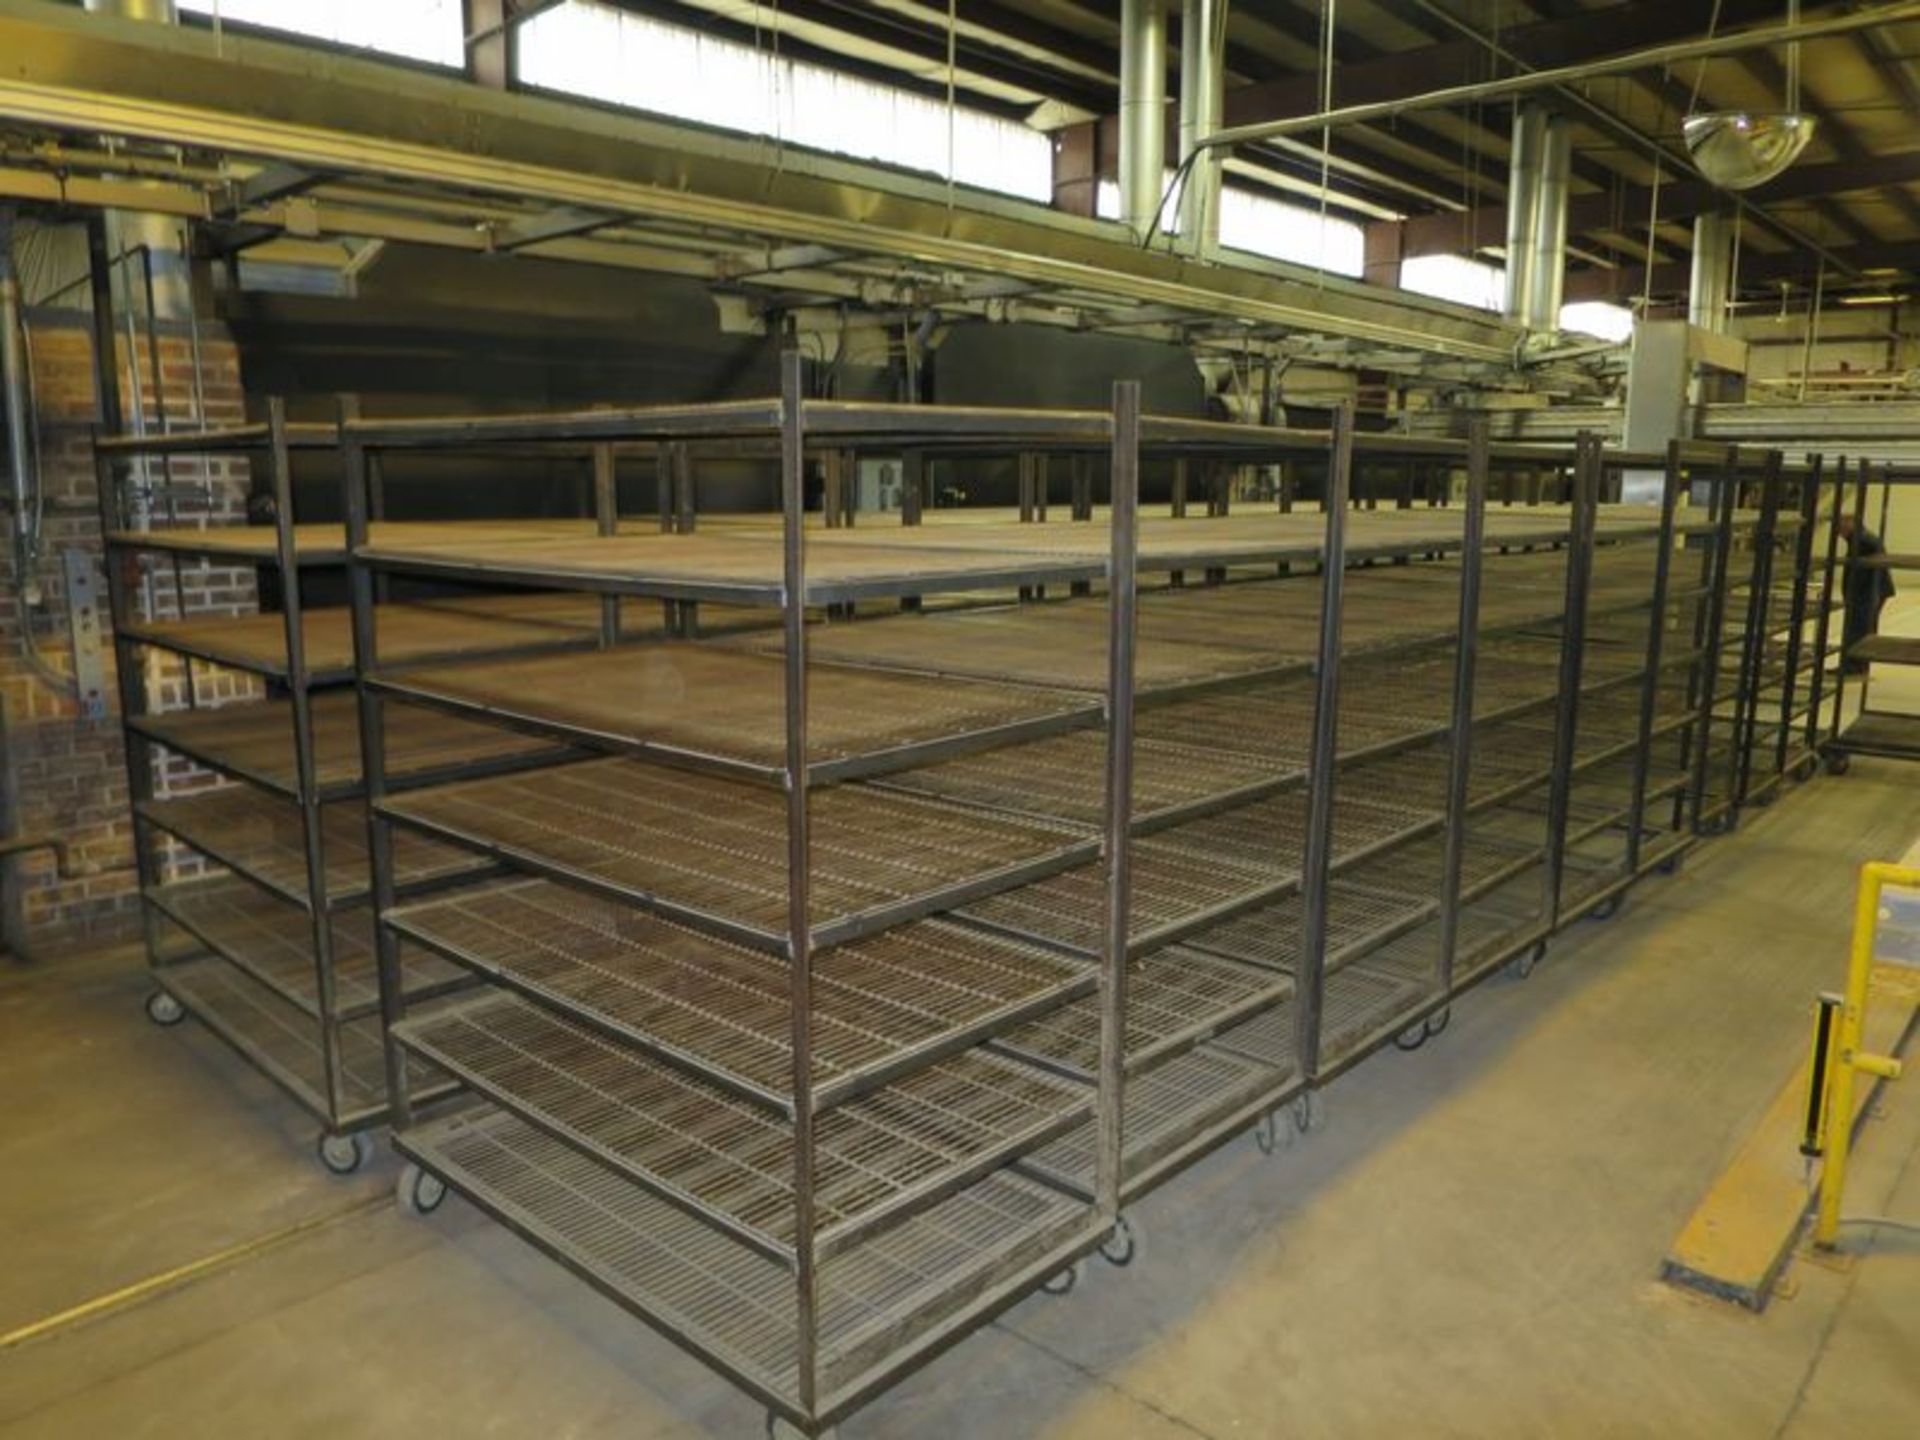 Lot of (20) 7-Tier mobile cooling racks, 9' L x 3' w x 6' high - Image 2 of 2